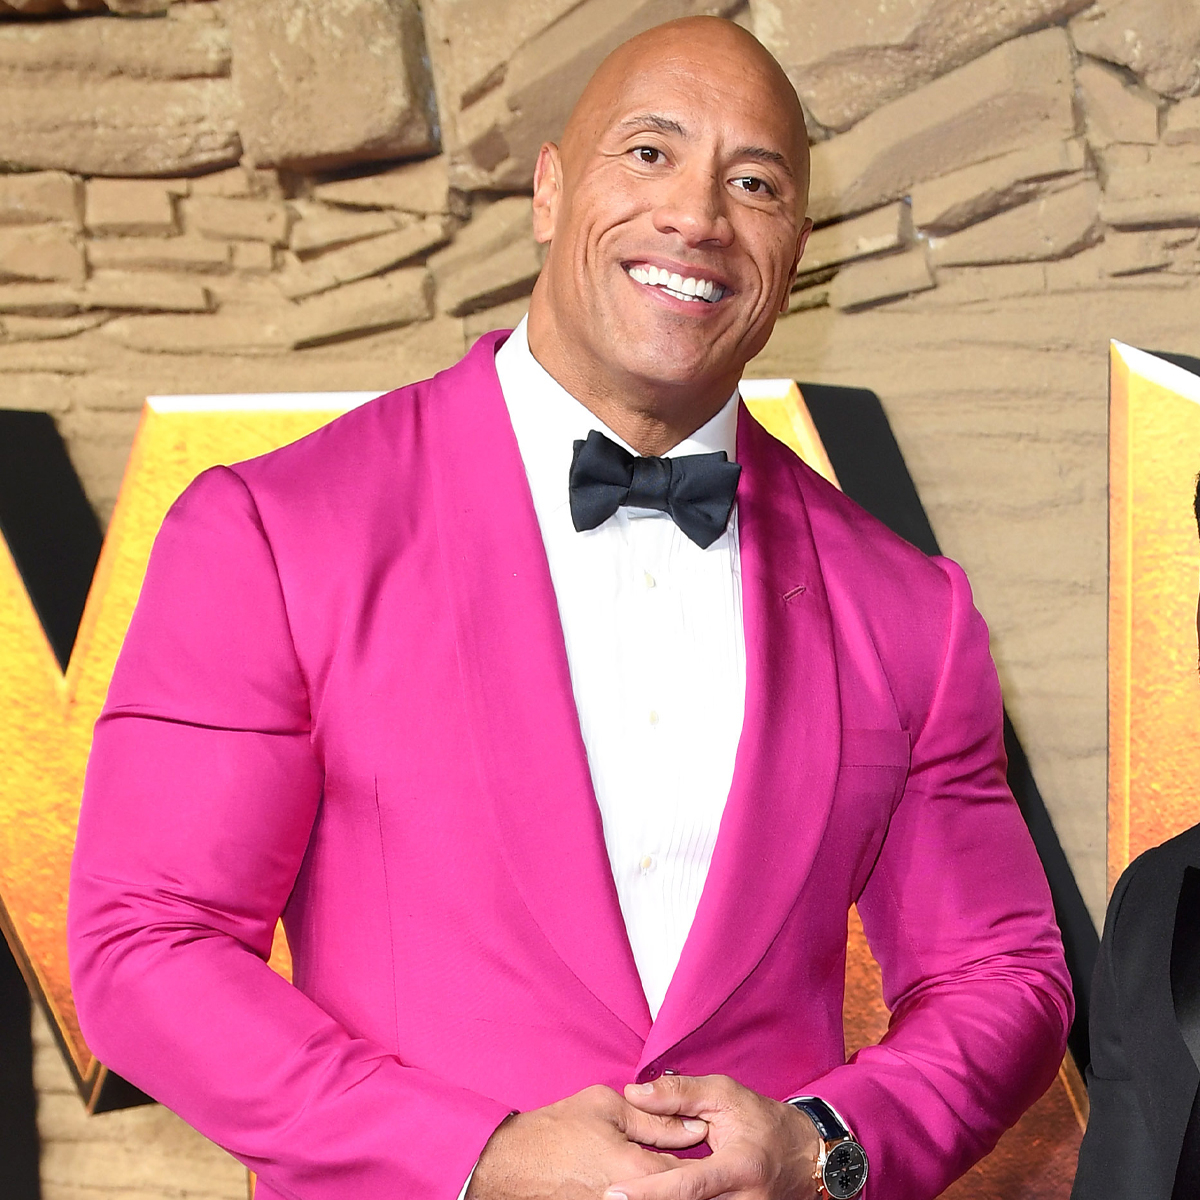 Dwayne Johnson Made This Surprising Request When He Hosted SNL For the First Time – E! Online